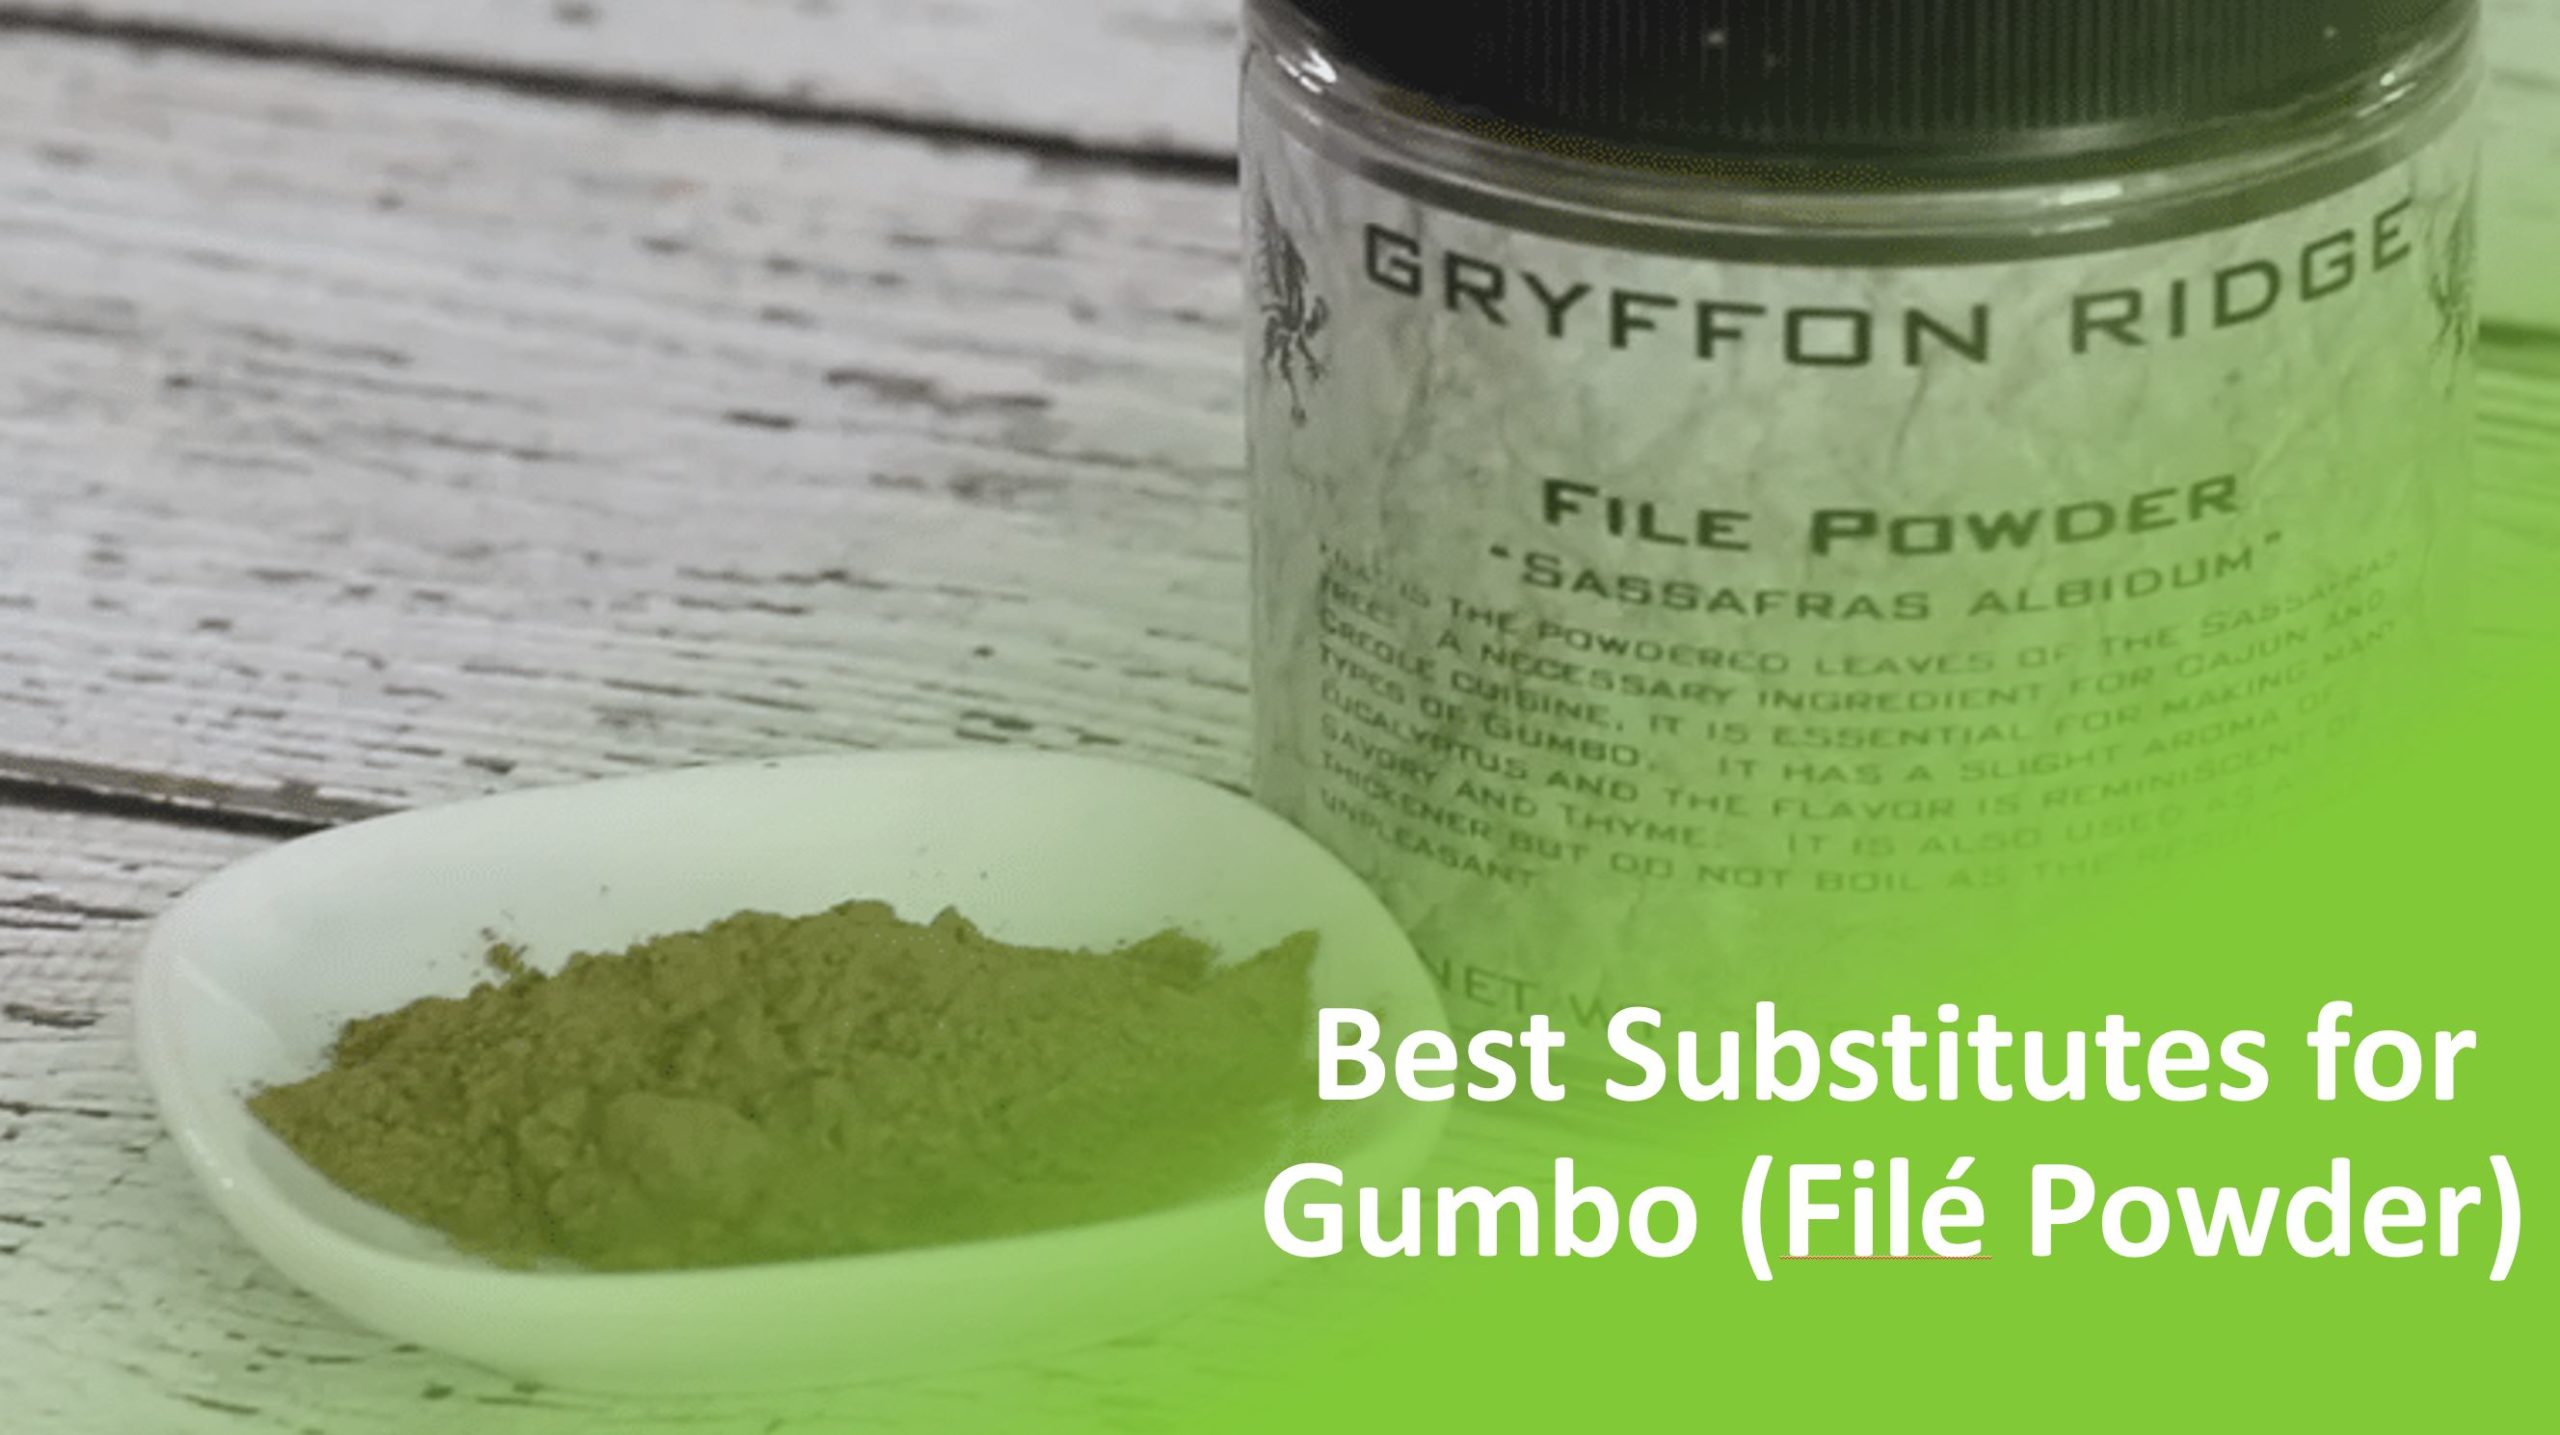 10 Best File Powder Substitutes With Images